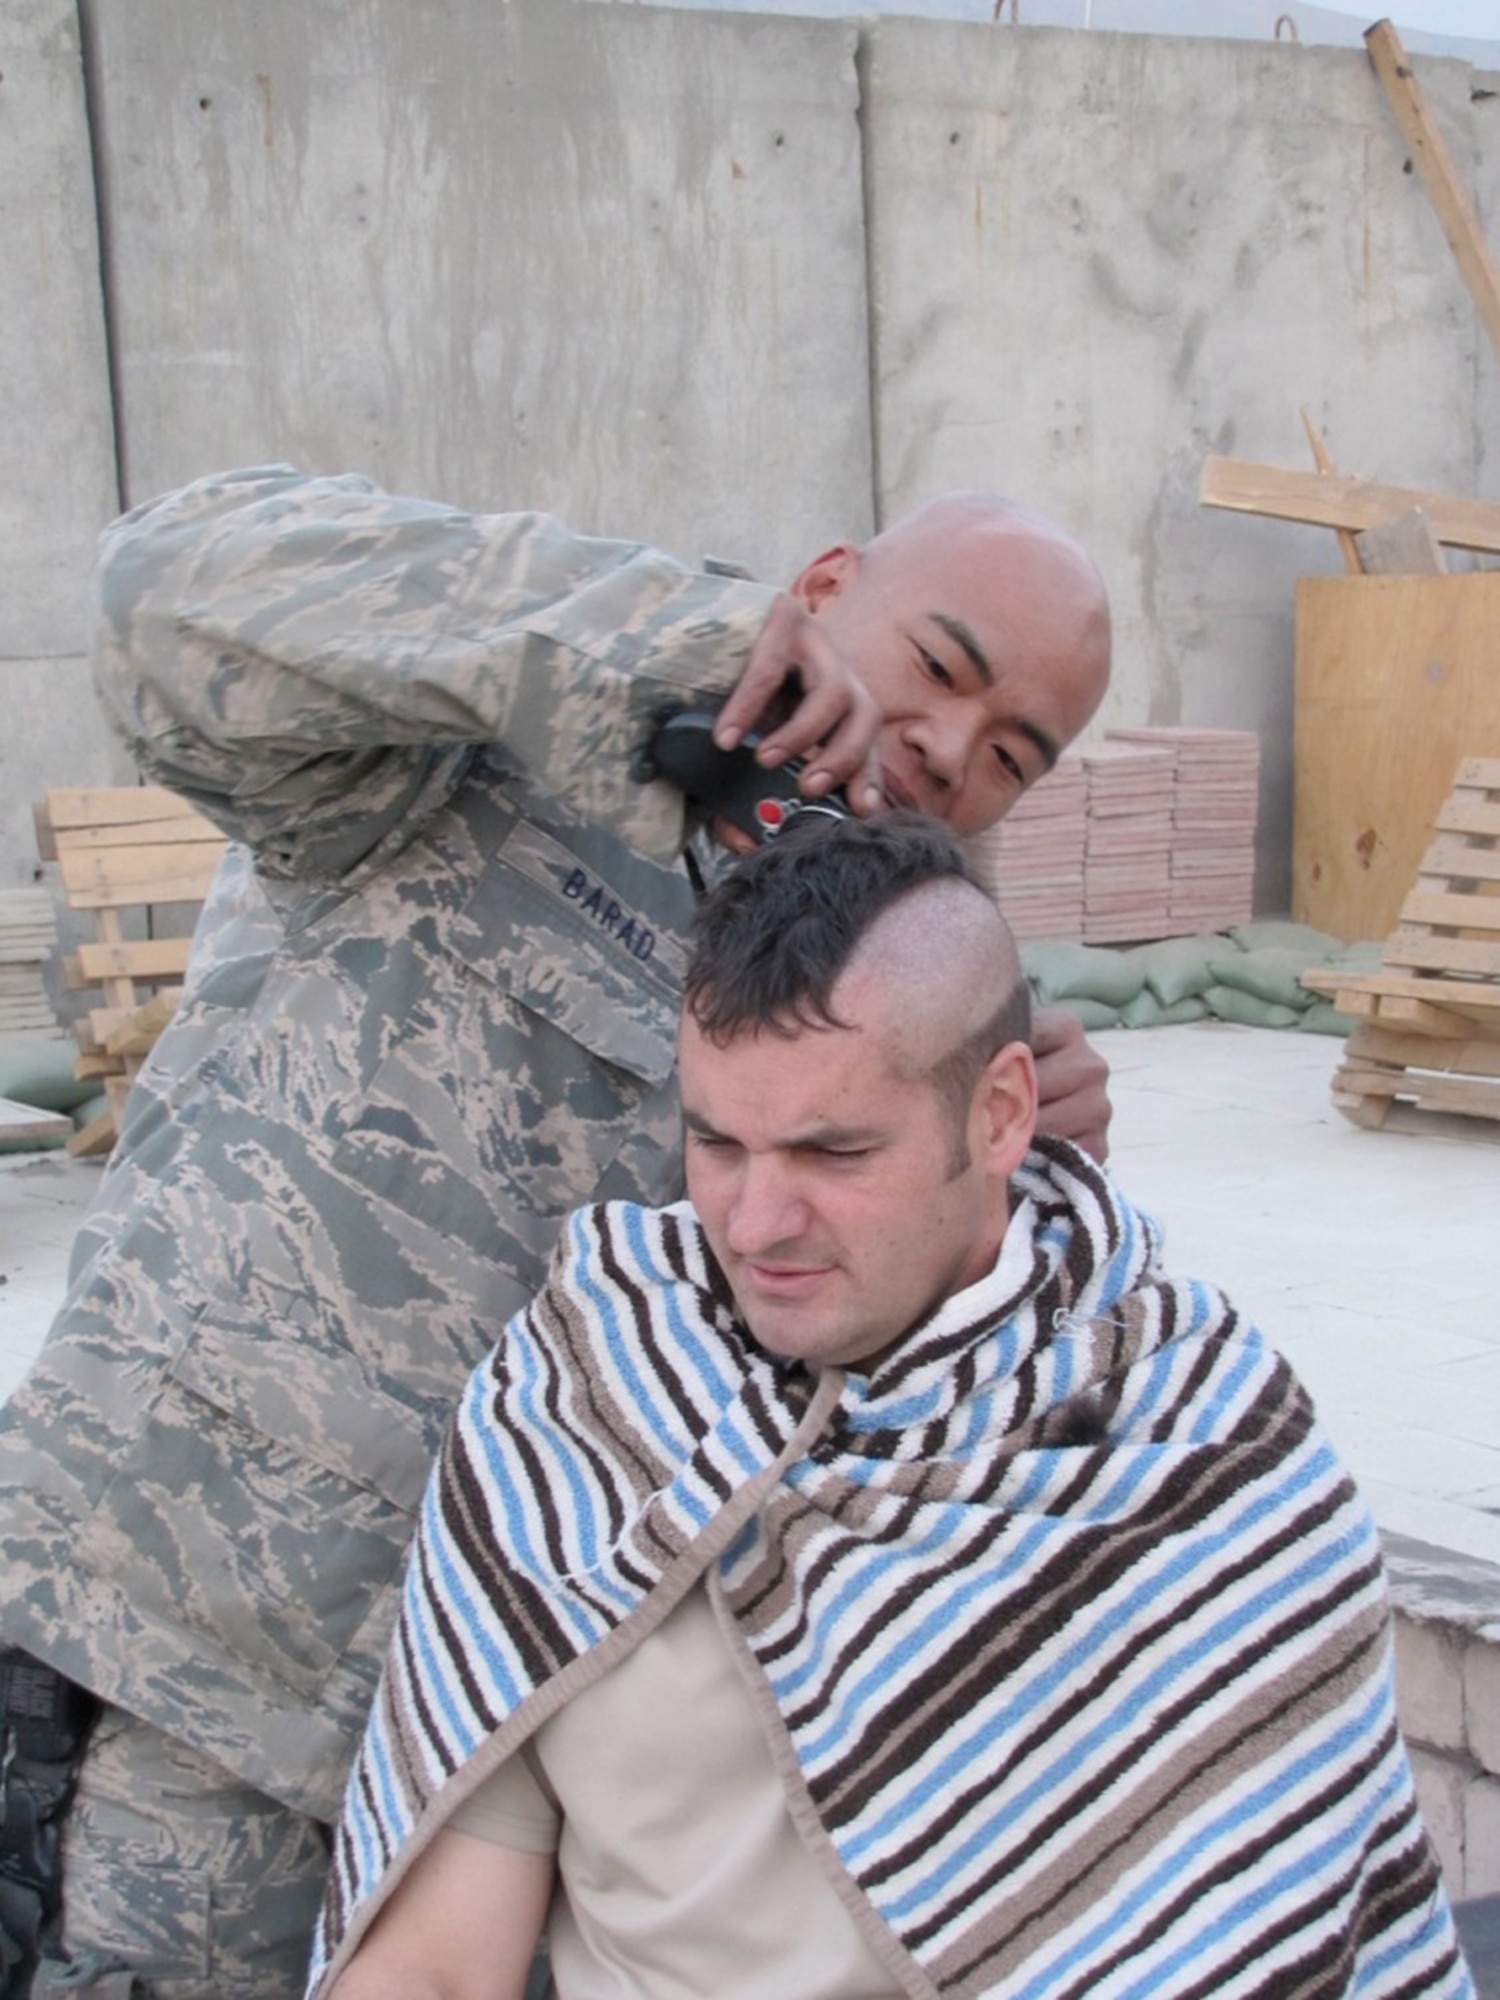 Tech. Sgt. Arthur Barad shaves Senior Master Sgt. Bubba Beason's head so he could participate in a group photo for Lyla, a cancer patient and the St. Jude's Childrens Research Hospital Dec 6, 2010. Sergeant Barad is a C-27 NATO Air Training Command - Afghanistan adviser. (U.S. Navy photo/Petty Officer Jared Walker)